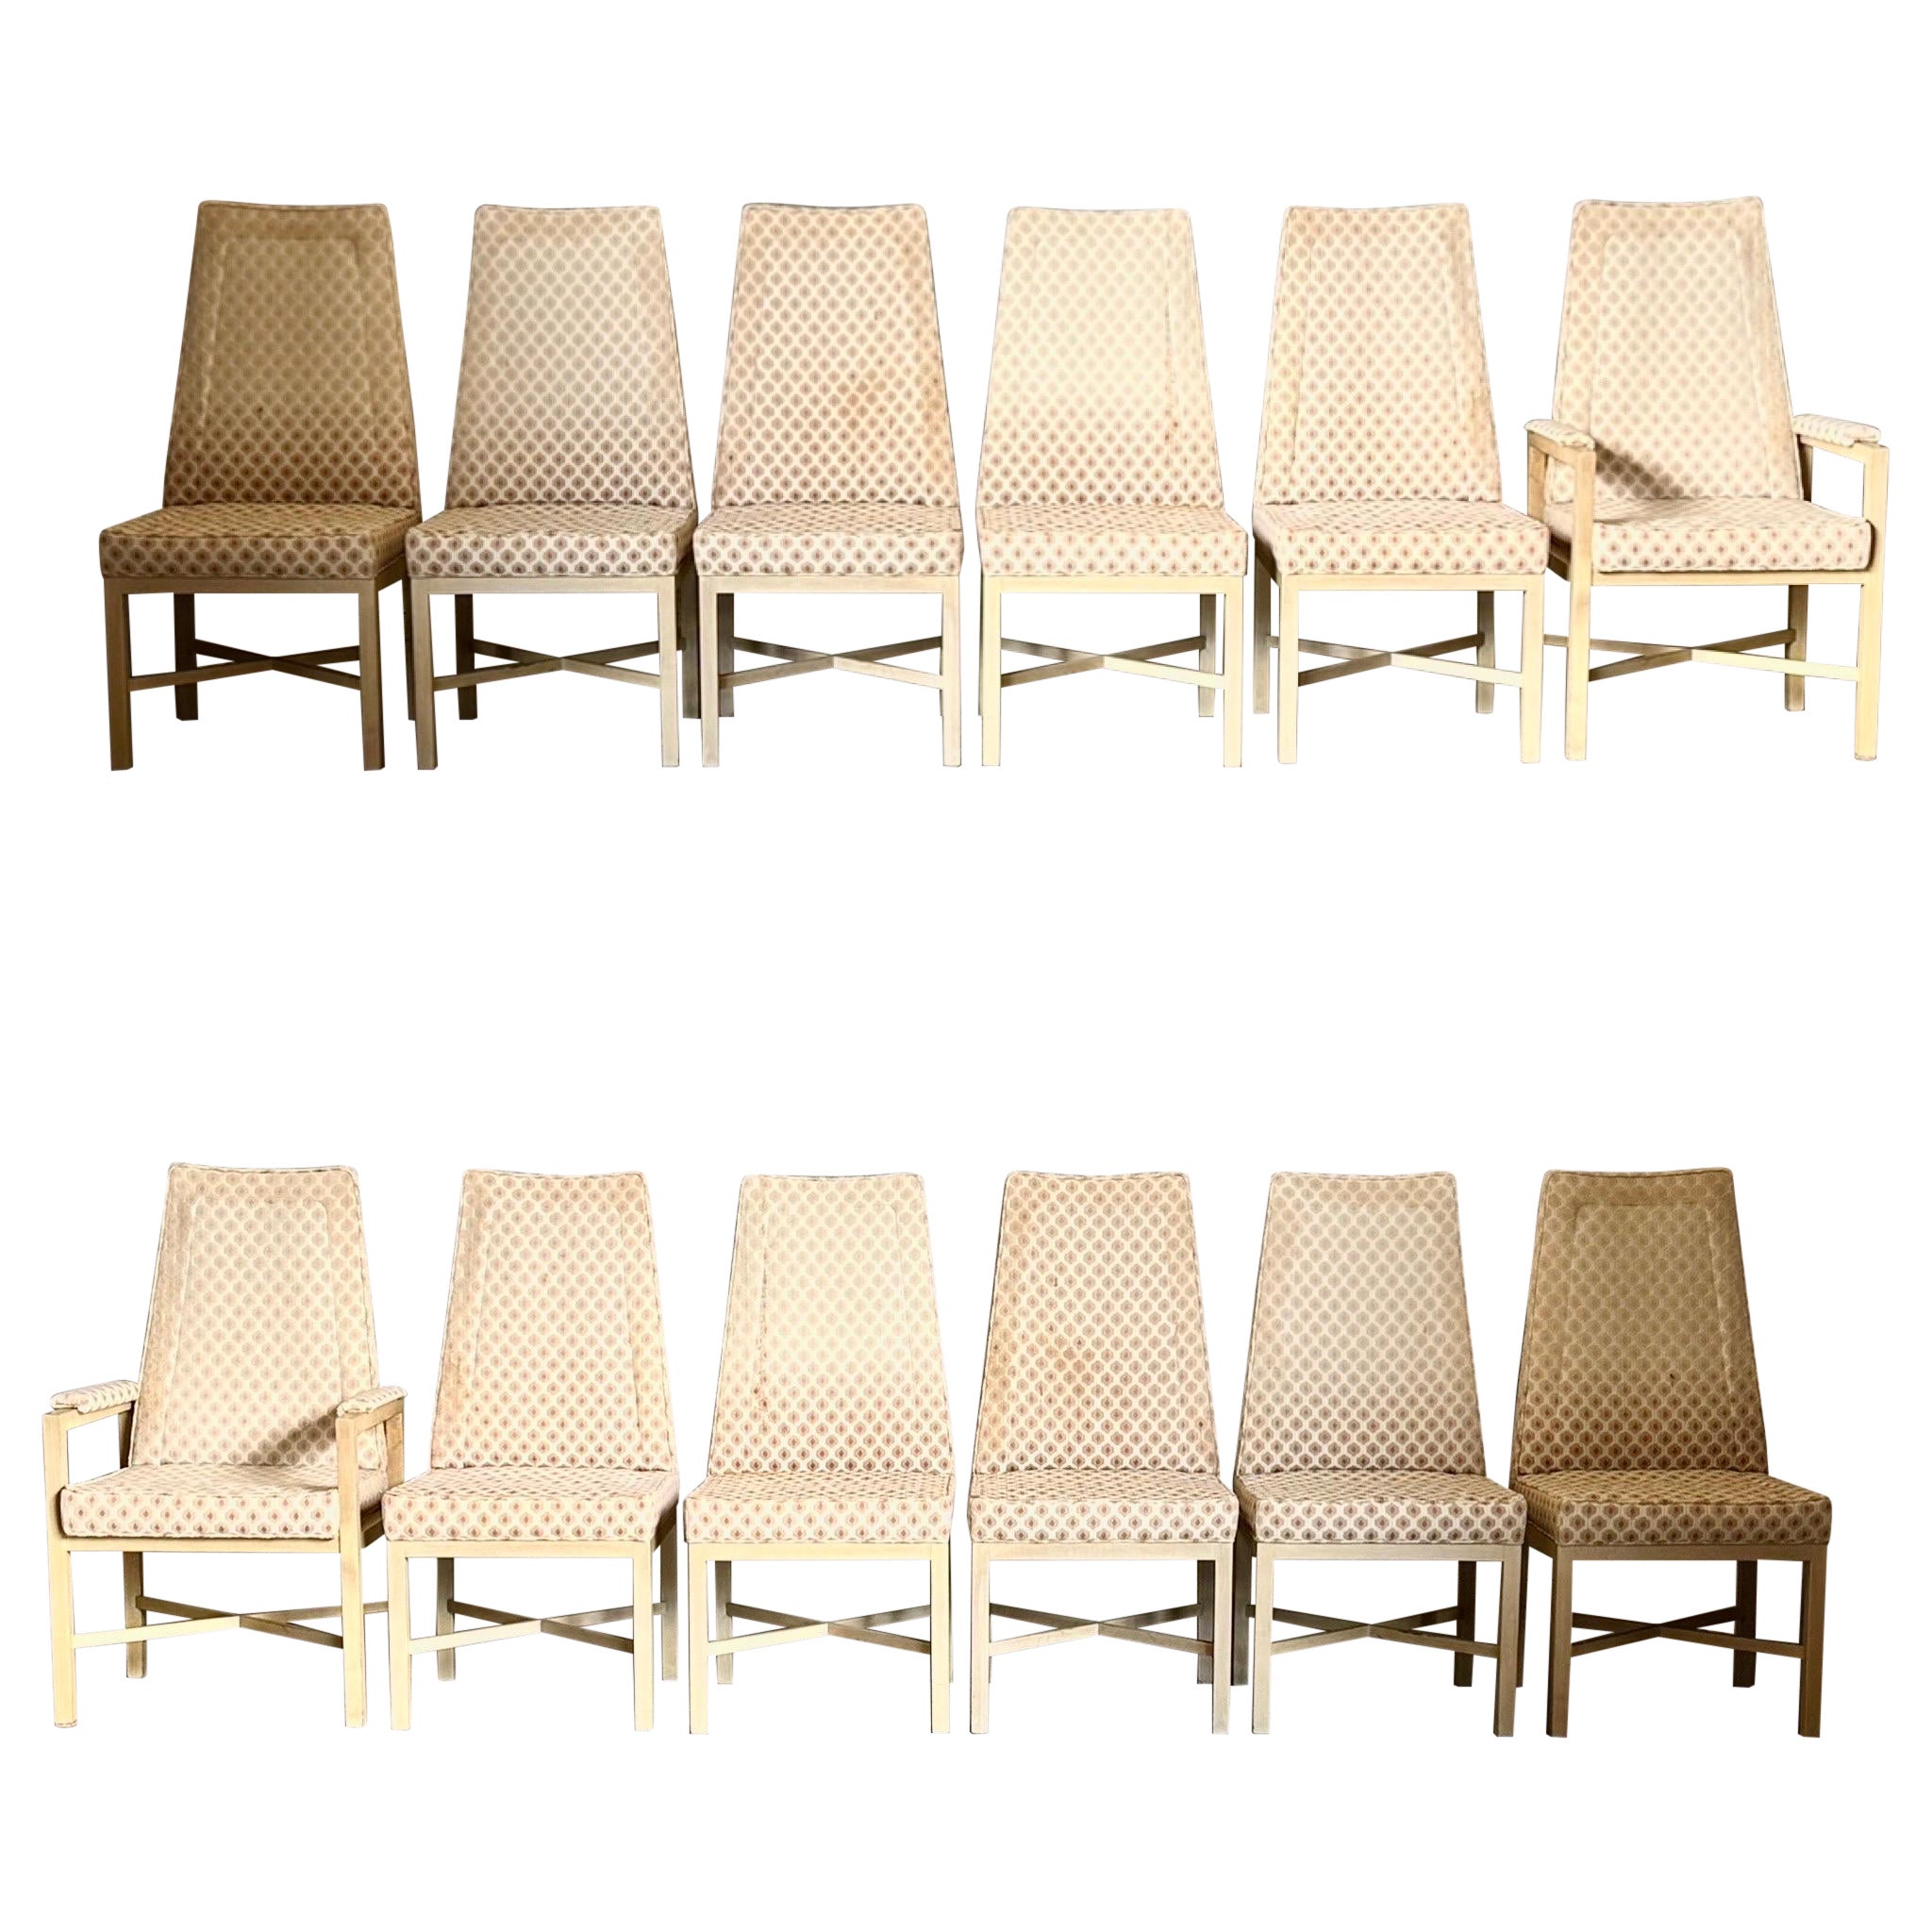 Roger Sprunger Dining Room Chairs